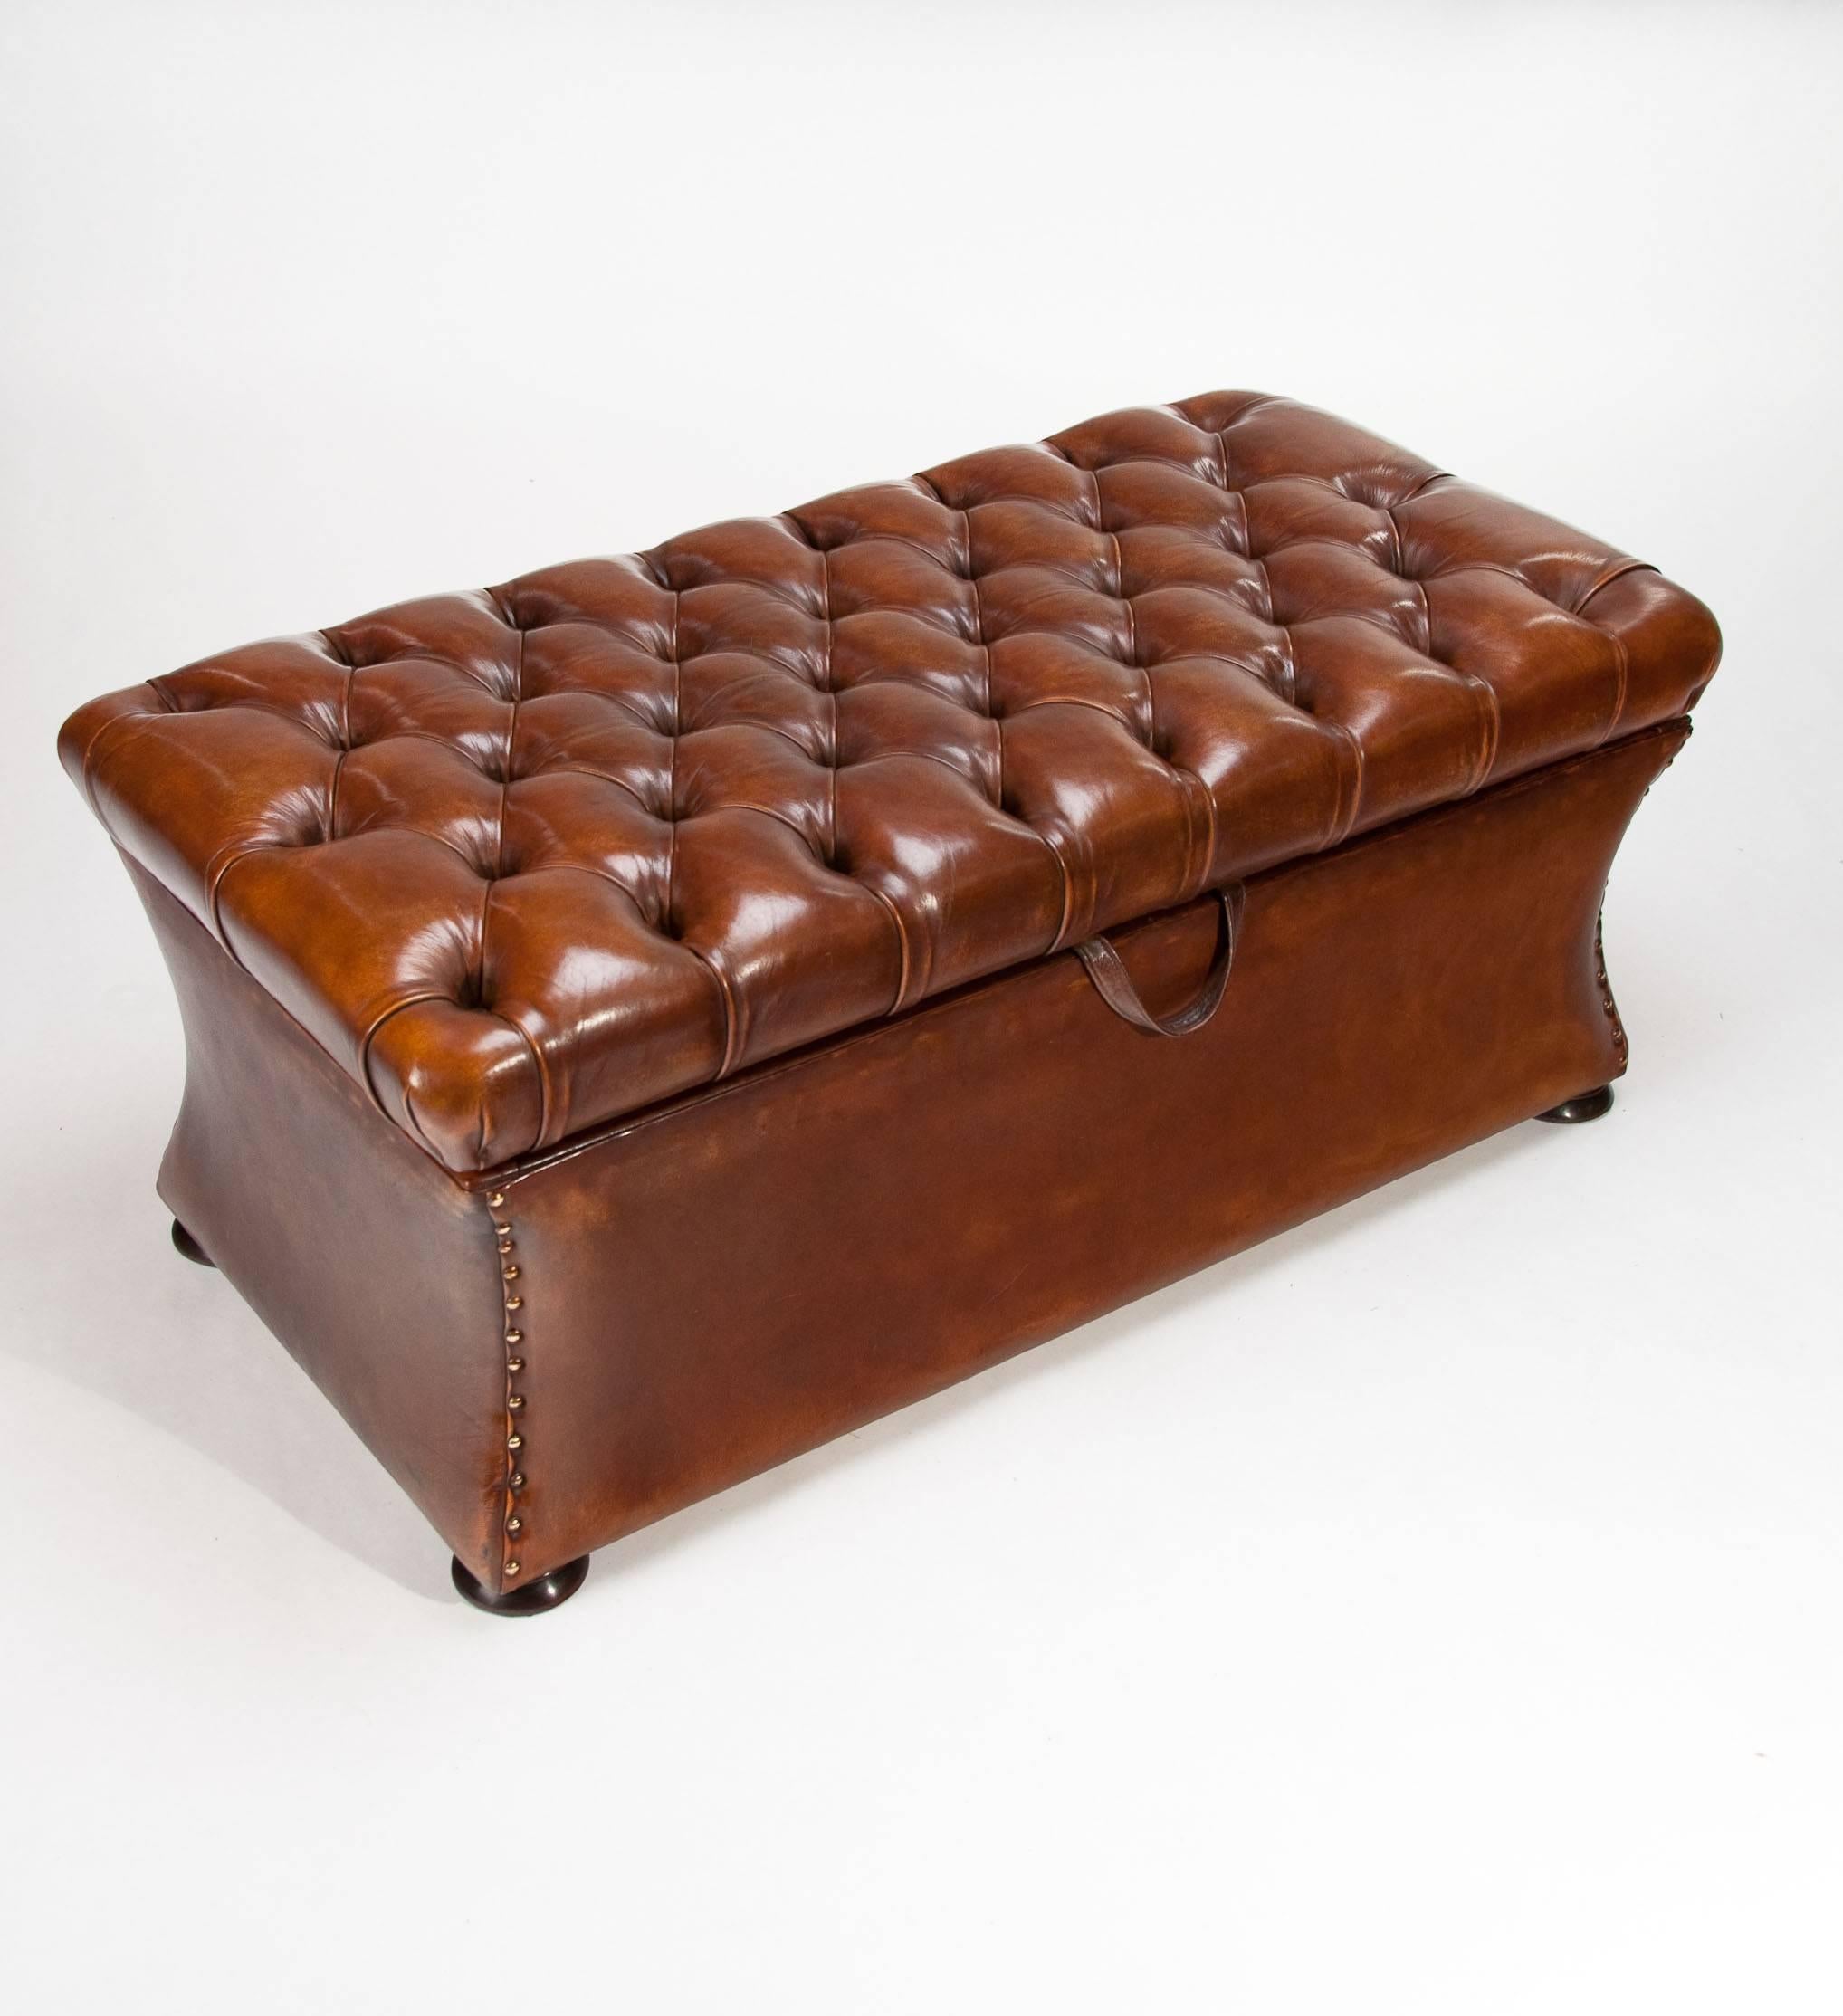 Quality 19th Century Shaped Leather Ottoman In Excellent Condition In Benington, Herts